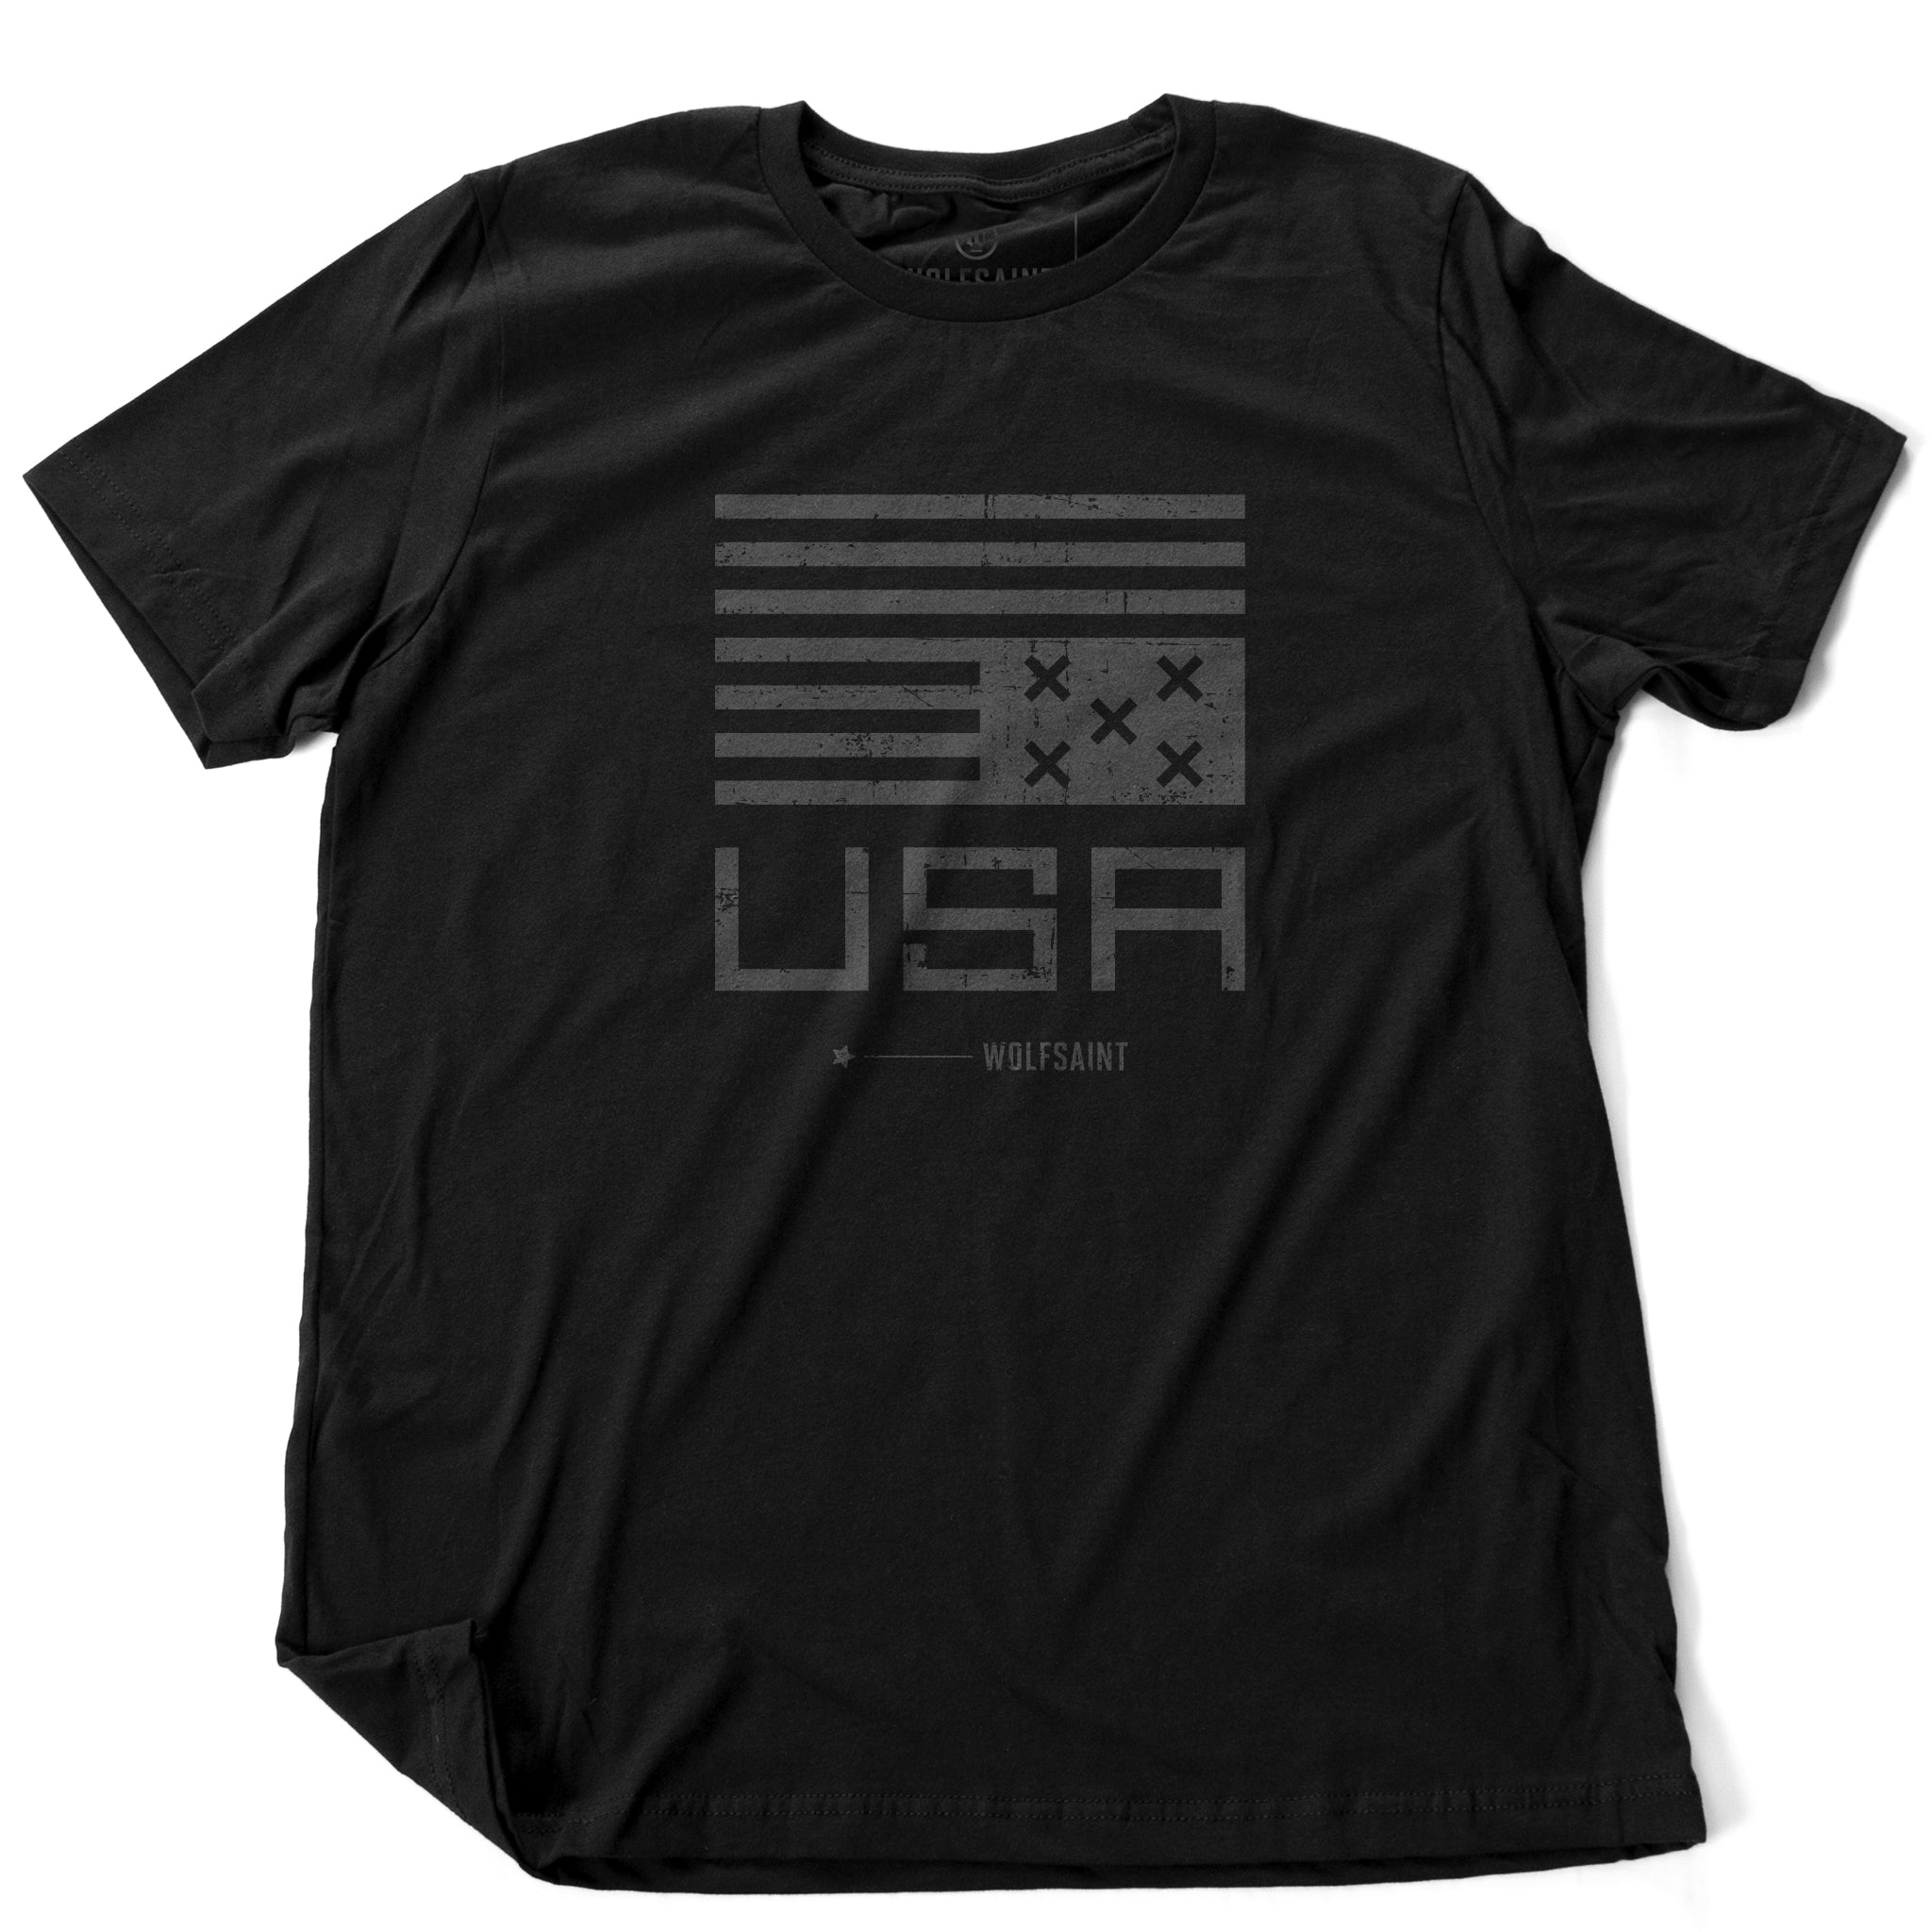 A classic graphic t-shirt featuring a political statement about the American democracy, showing an upside down simplified American flag with Xs instead of stars, above the letters “USA” and the WOLFSAINT gothic logo. From wolfsaint.net